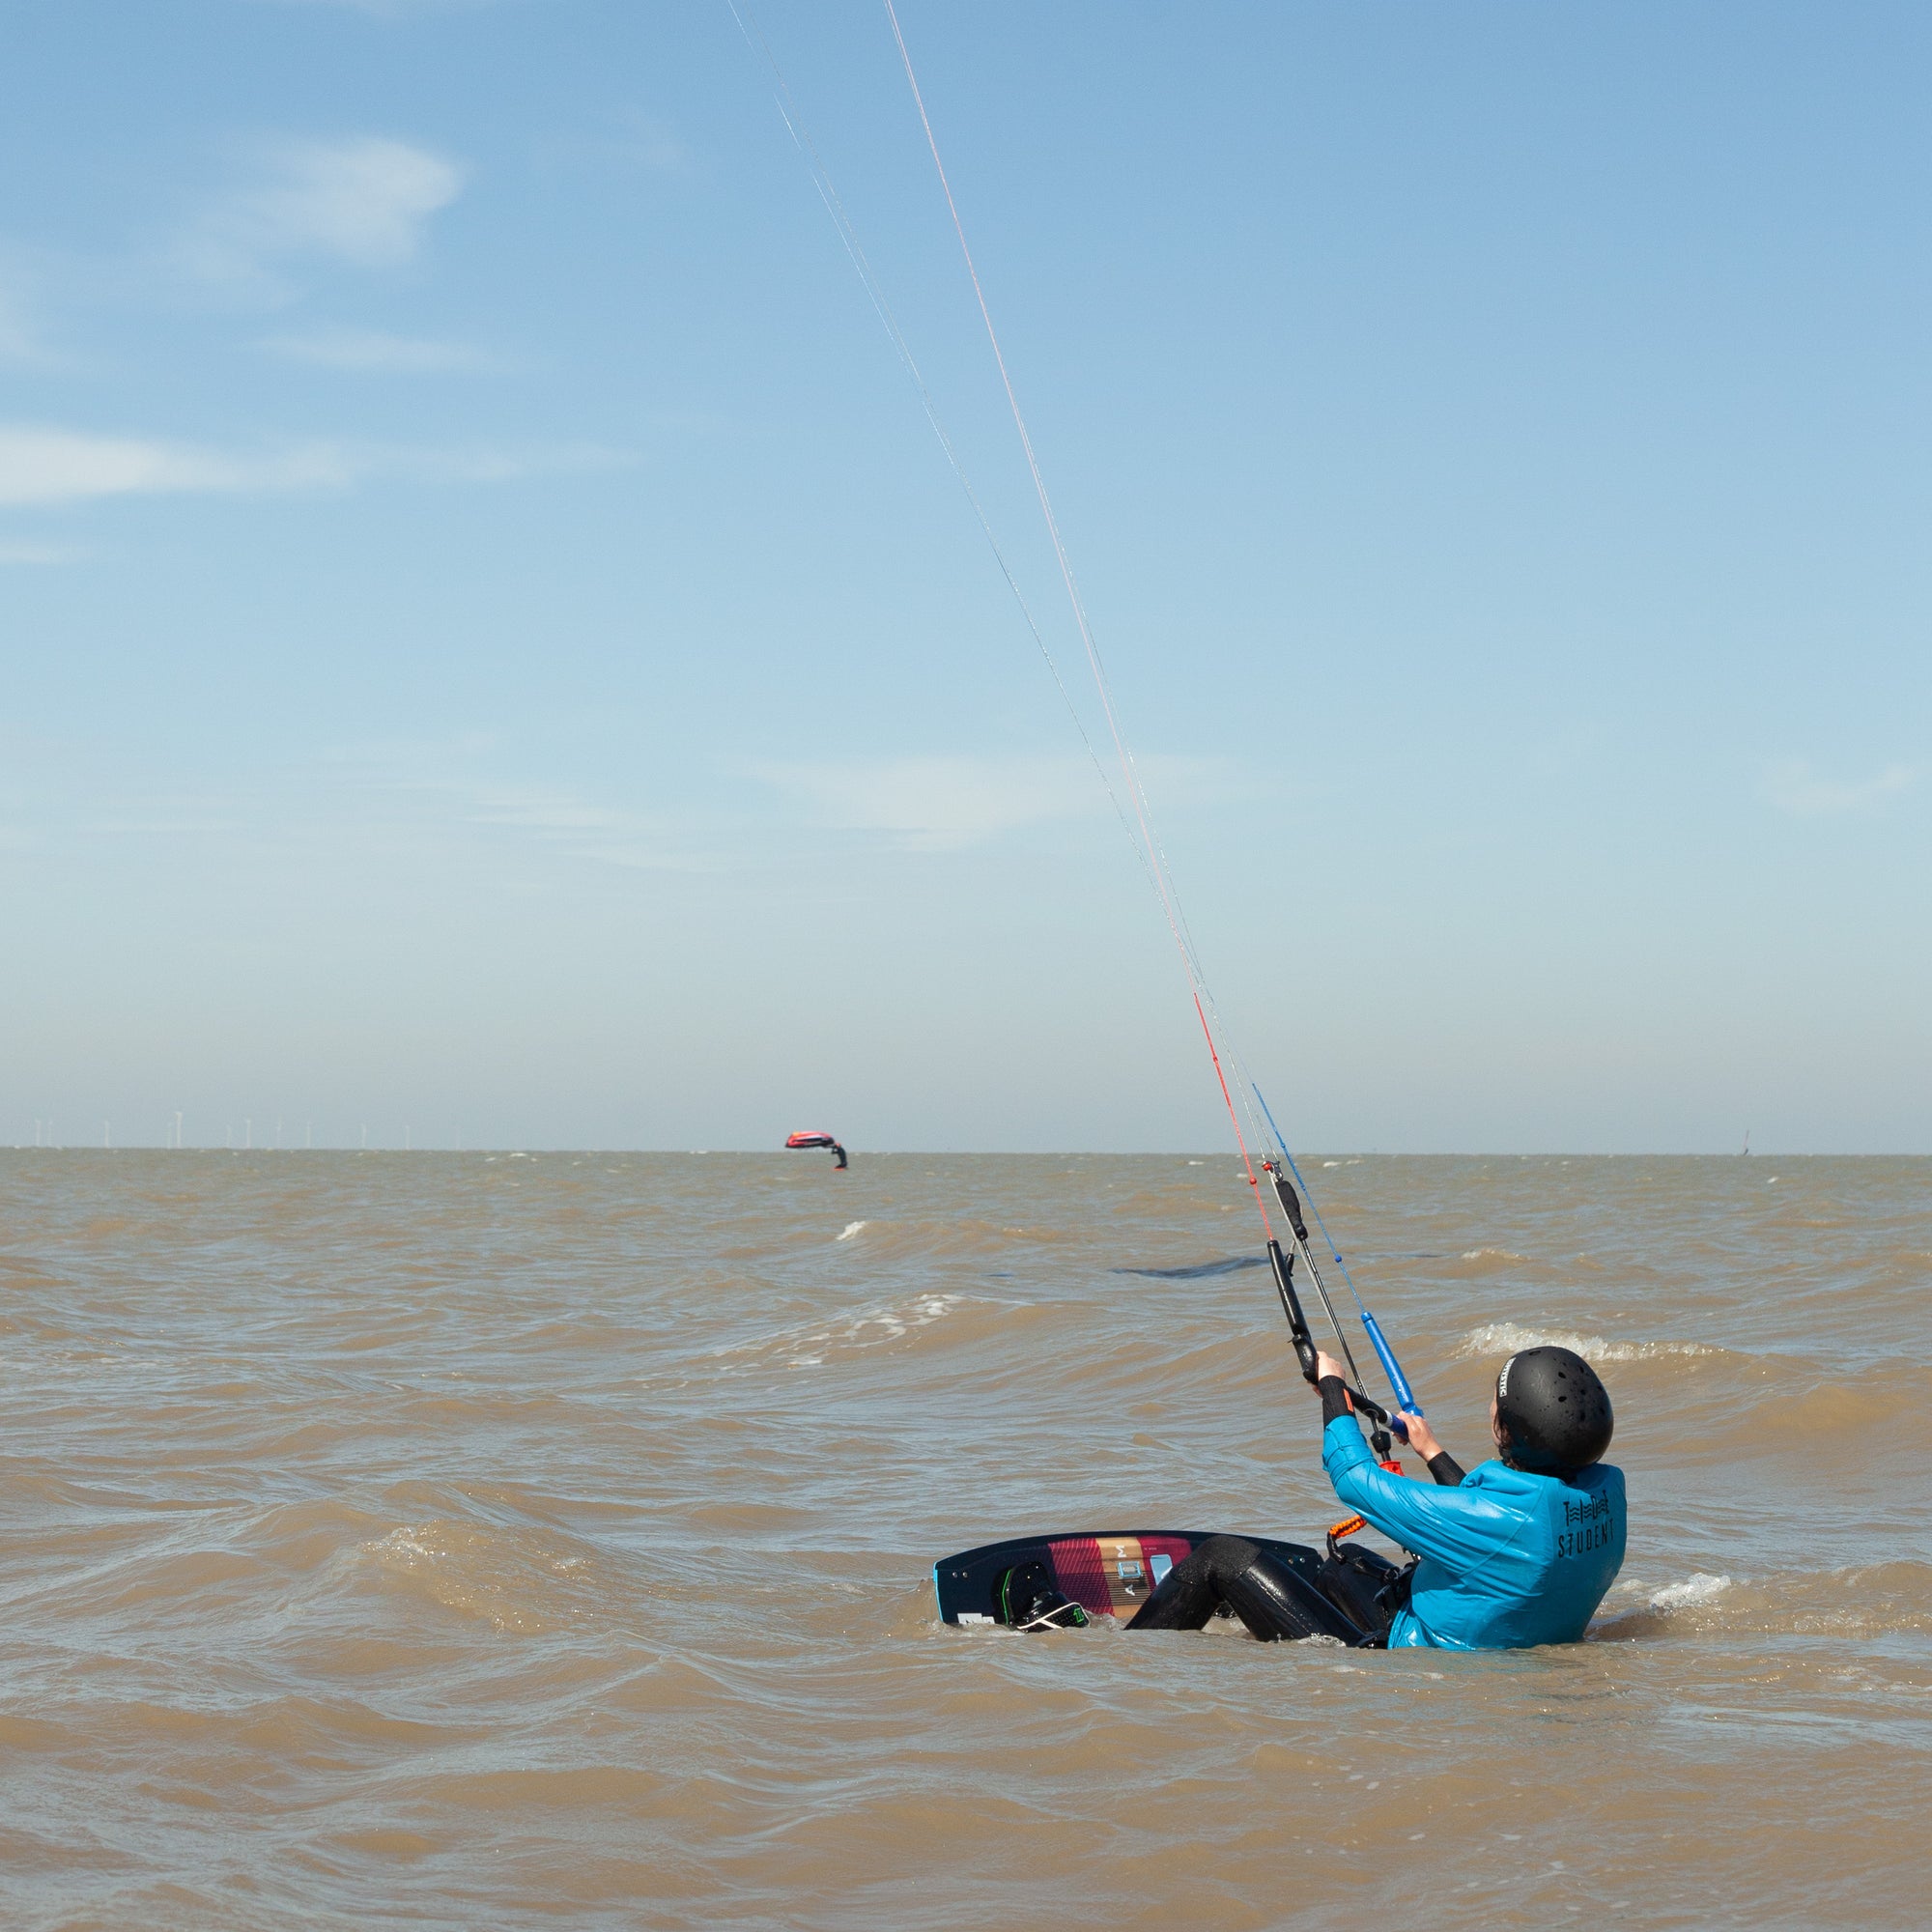 A Tide Watersports student on a private kitesurfing lesson in Margate, Kent in the water about to do a board start.